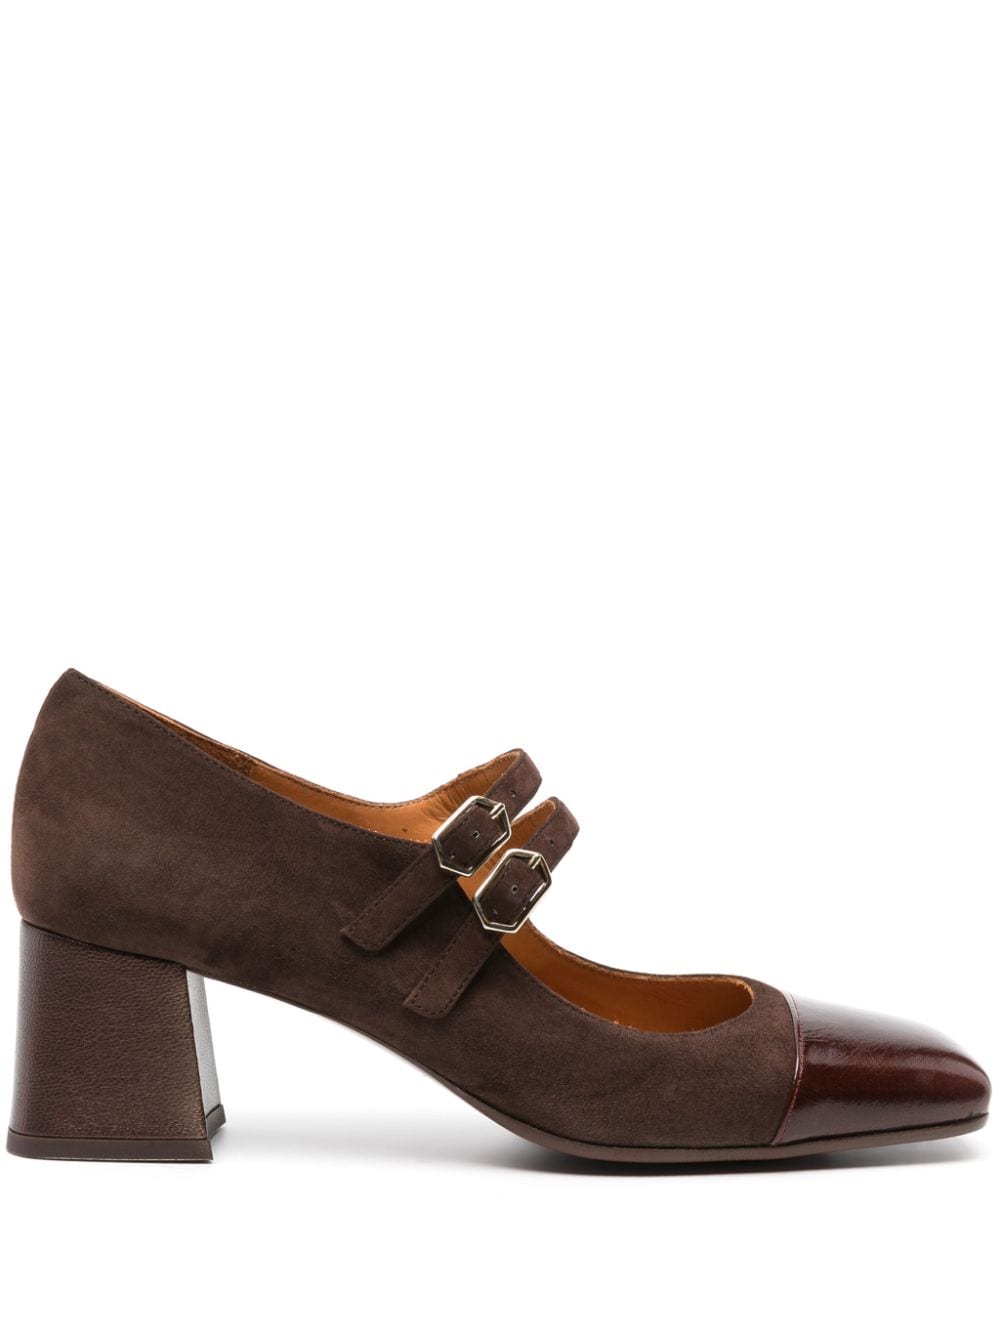 Chie Mihara Volcano 45mm square-toe leather pumps - Brown von Chie Mihara